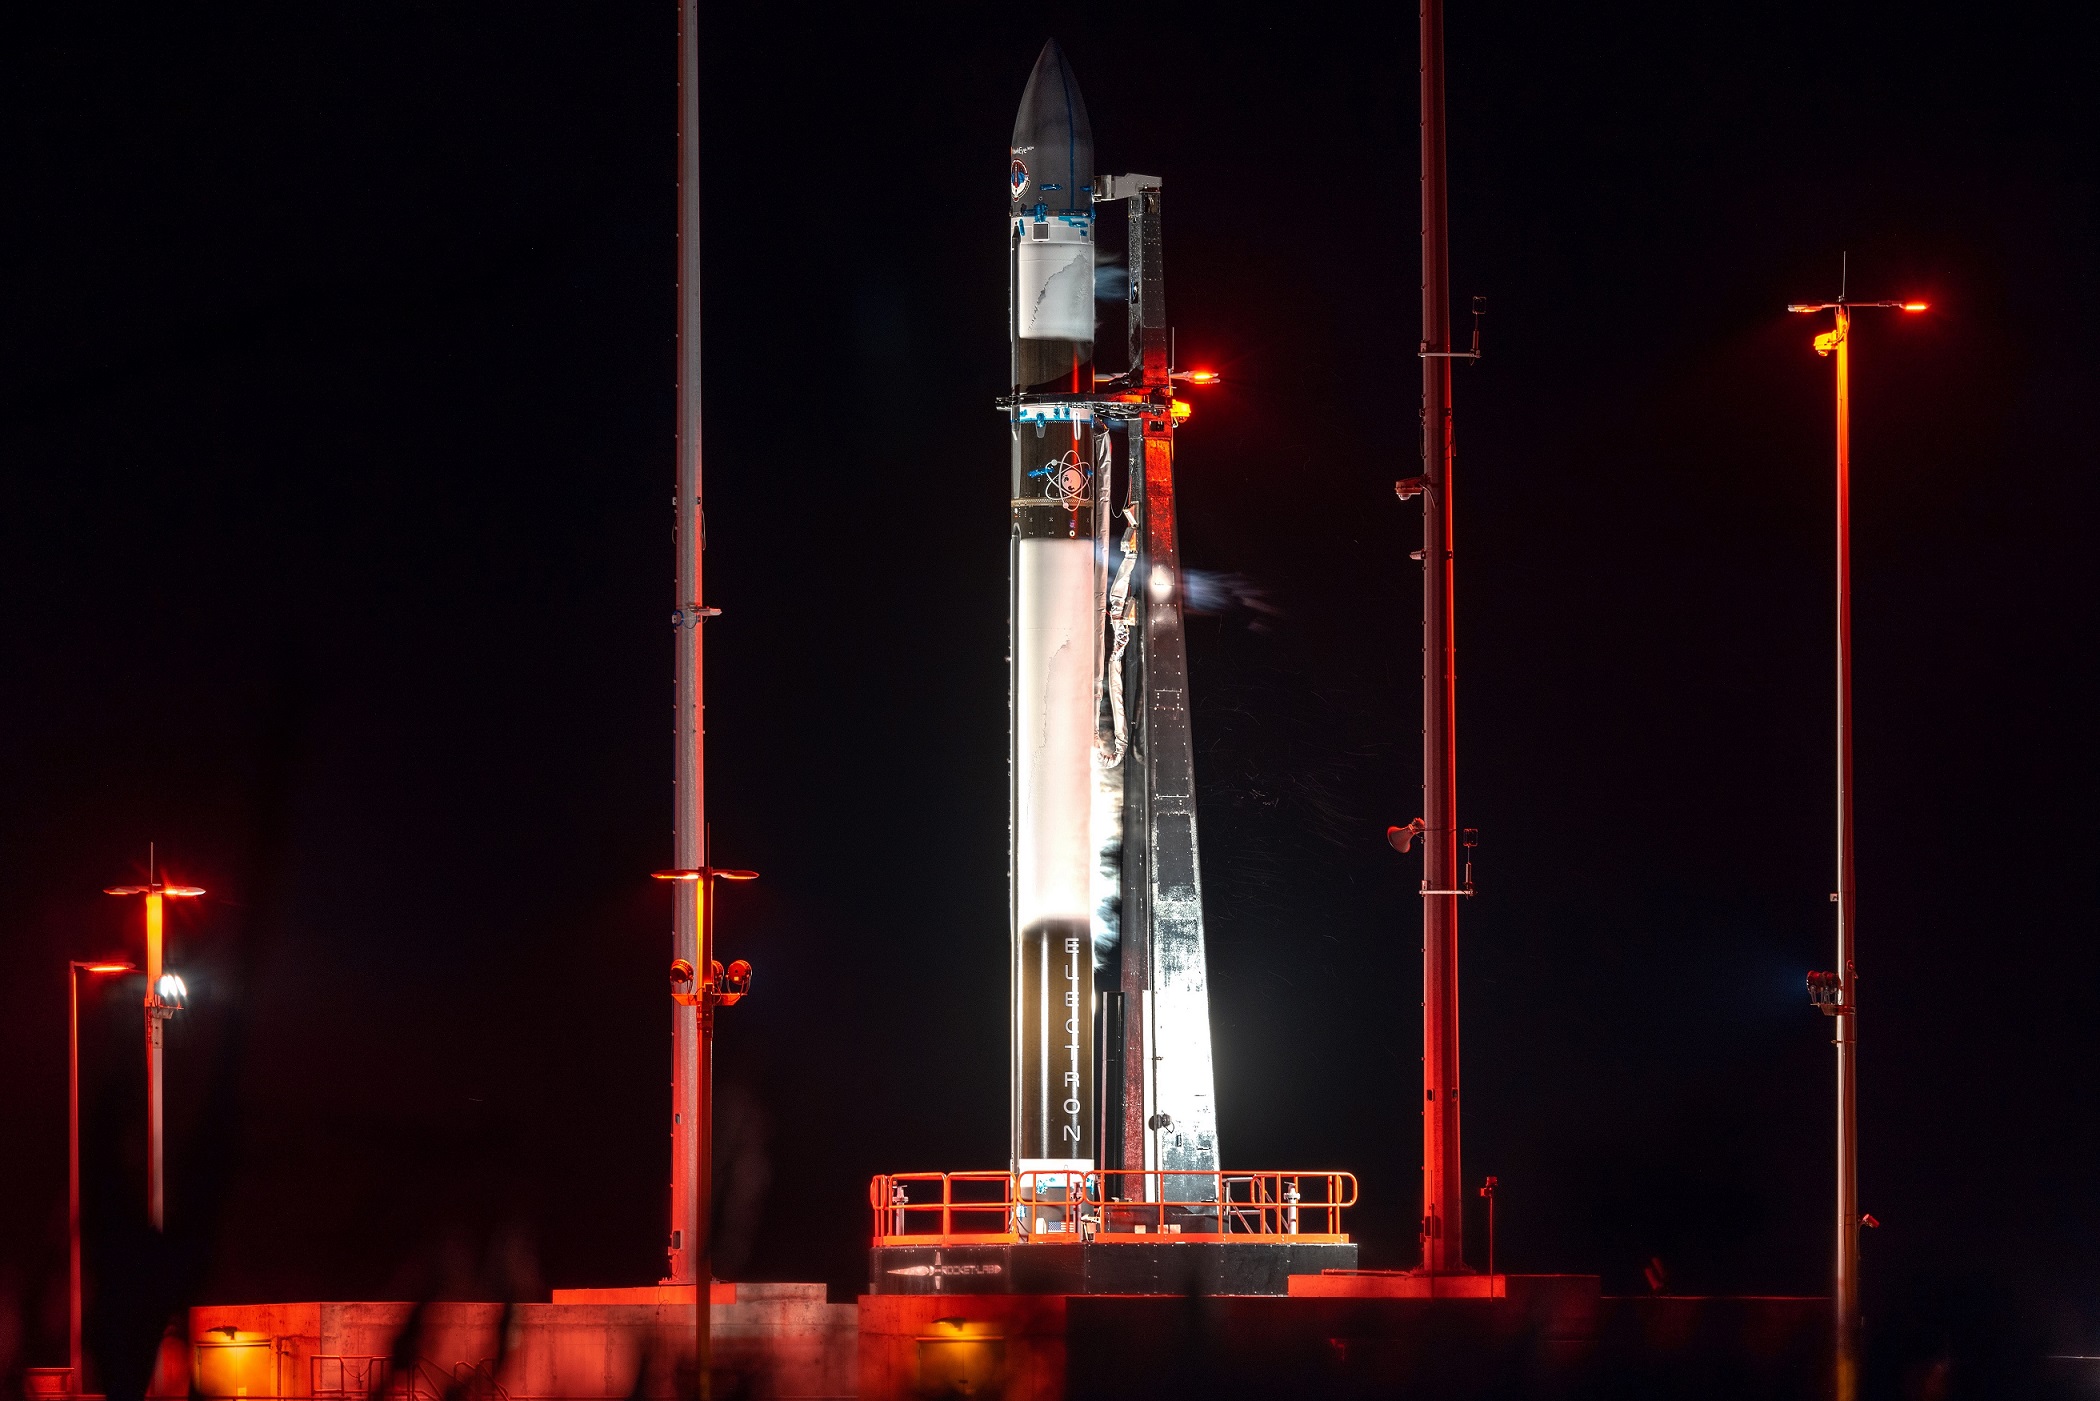 Wallops Island's 1st Electron Commercial Rocket Launch to be Visible